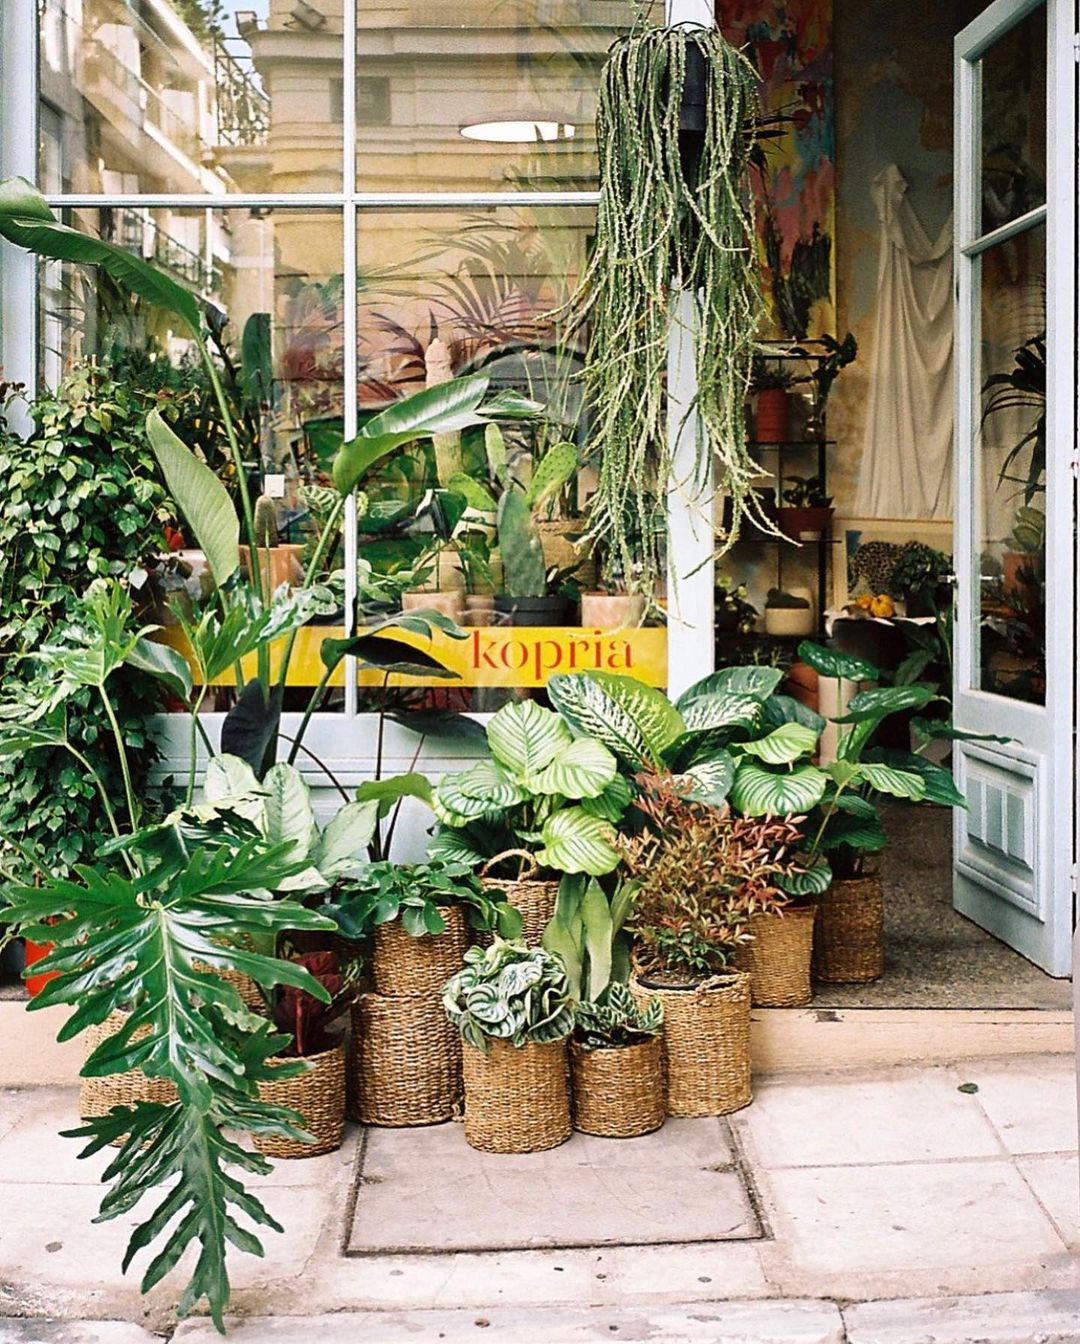 One of the top publications of @urbanjungleblog which has 1.1K likes and 3 comments